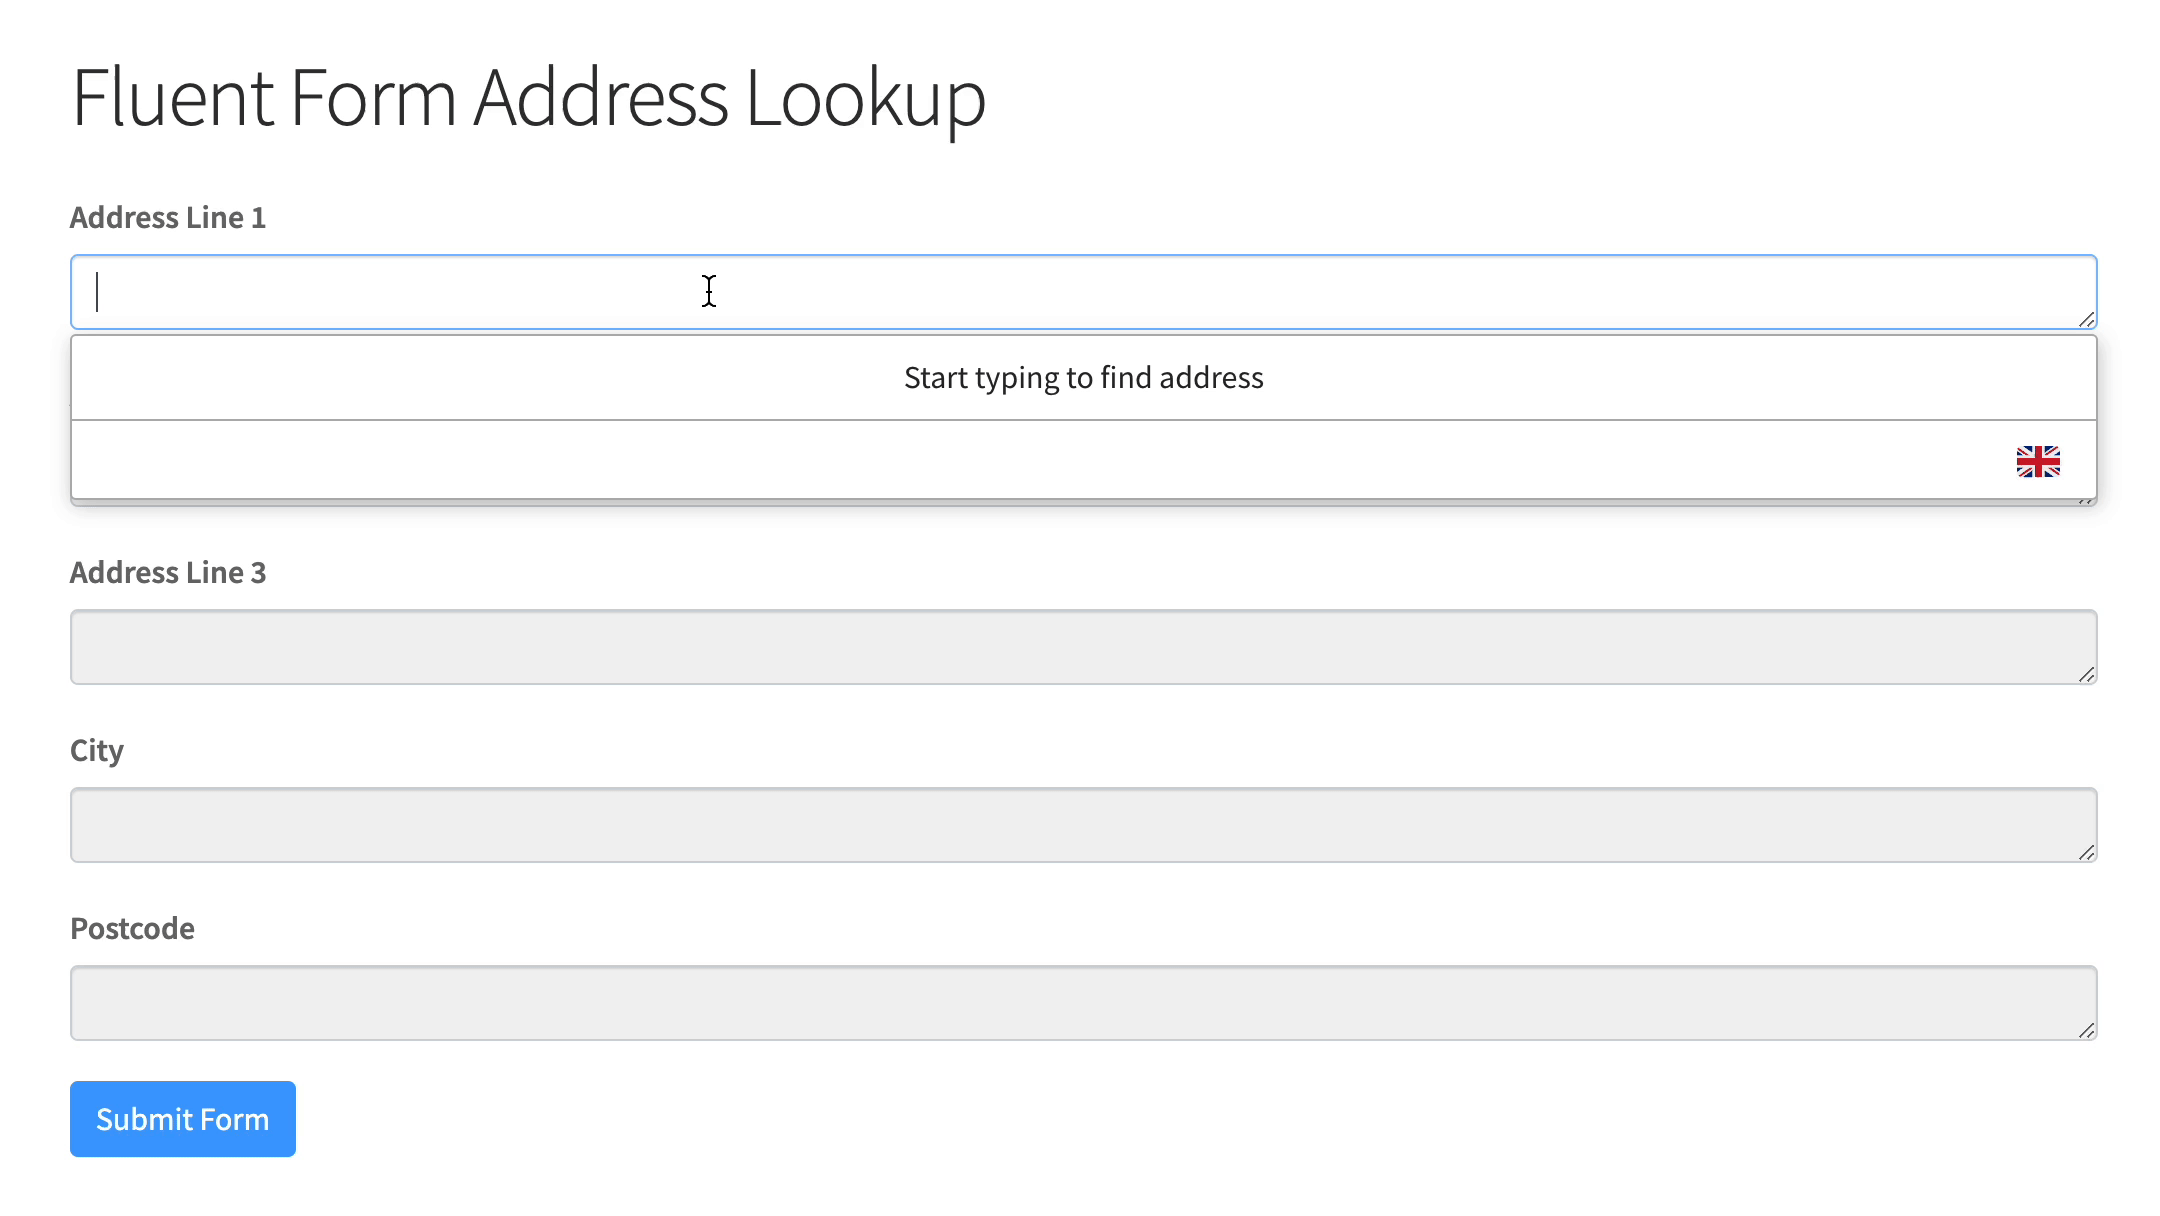 Activate Address Finder on your address collection forms-screenshot